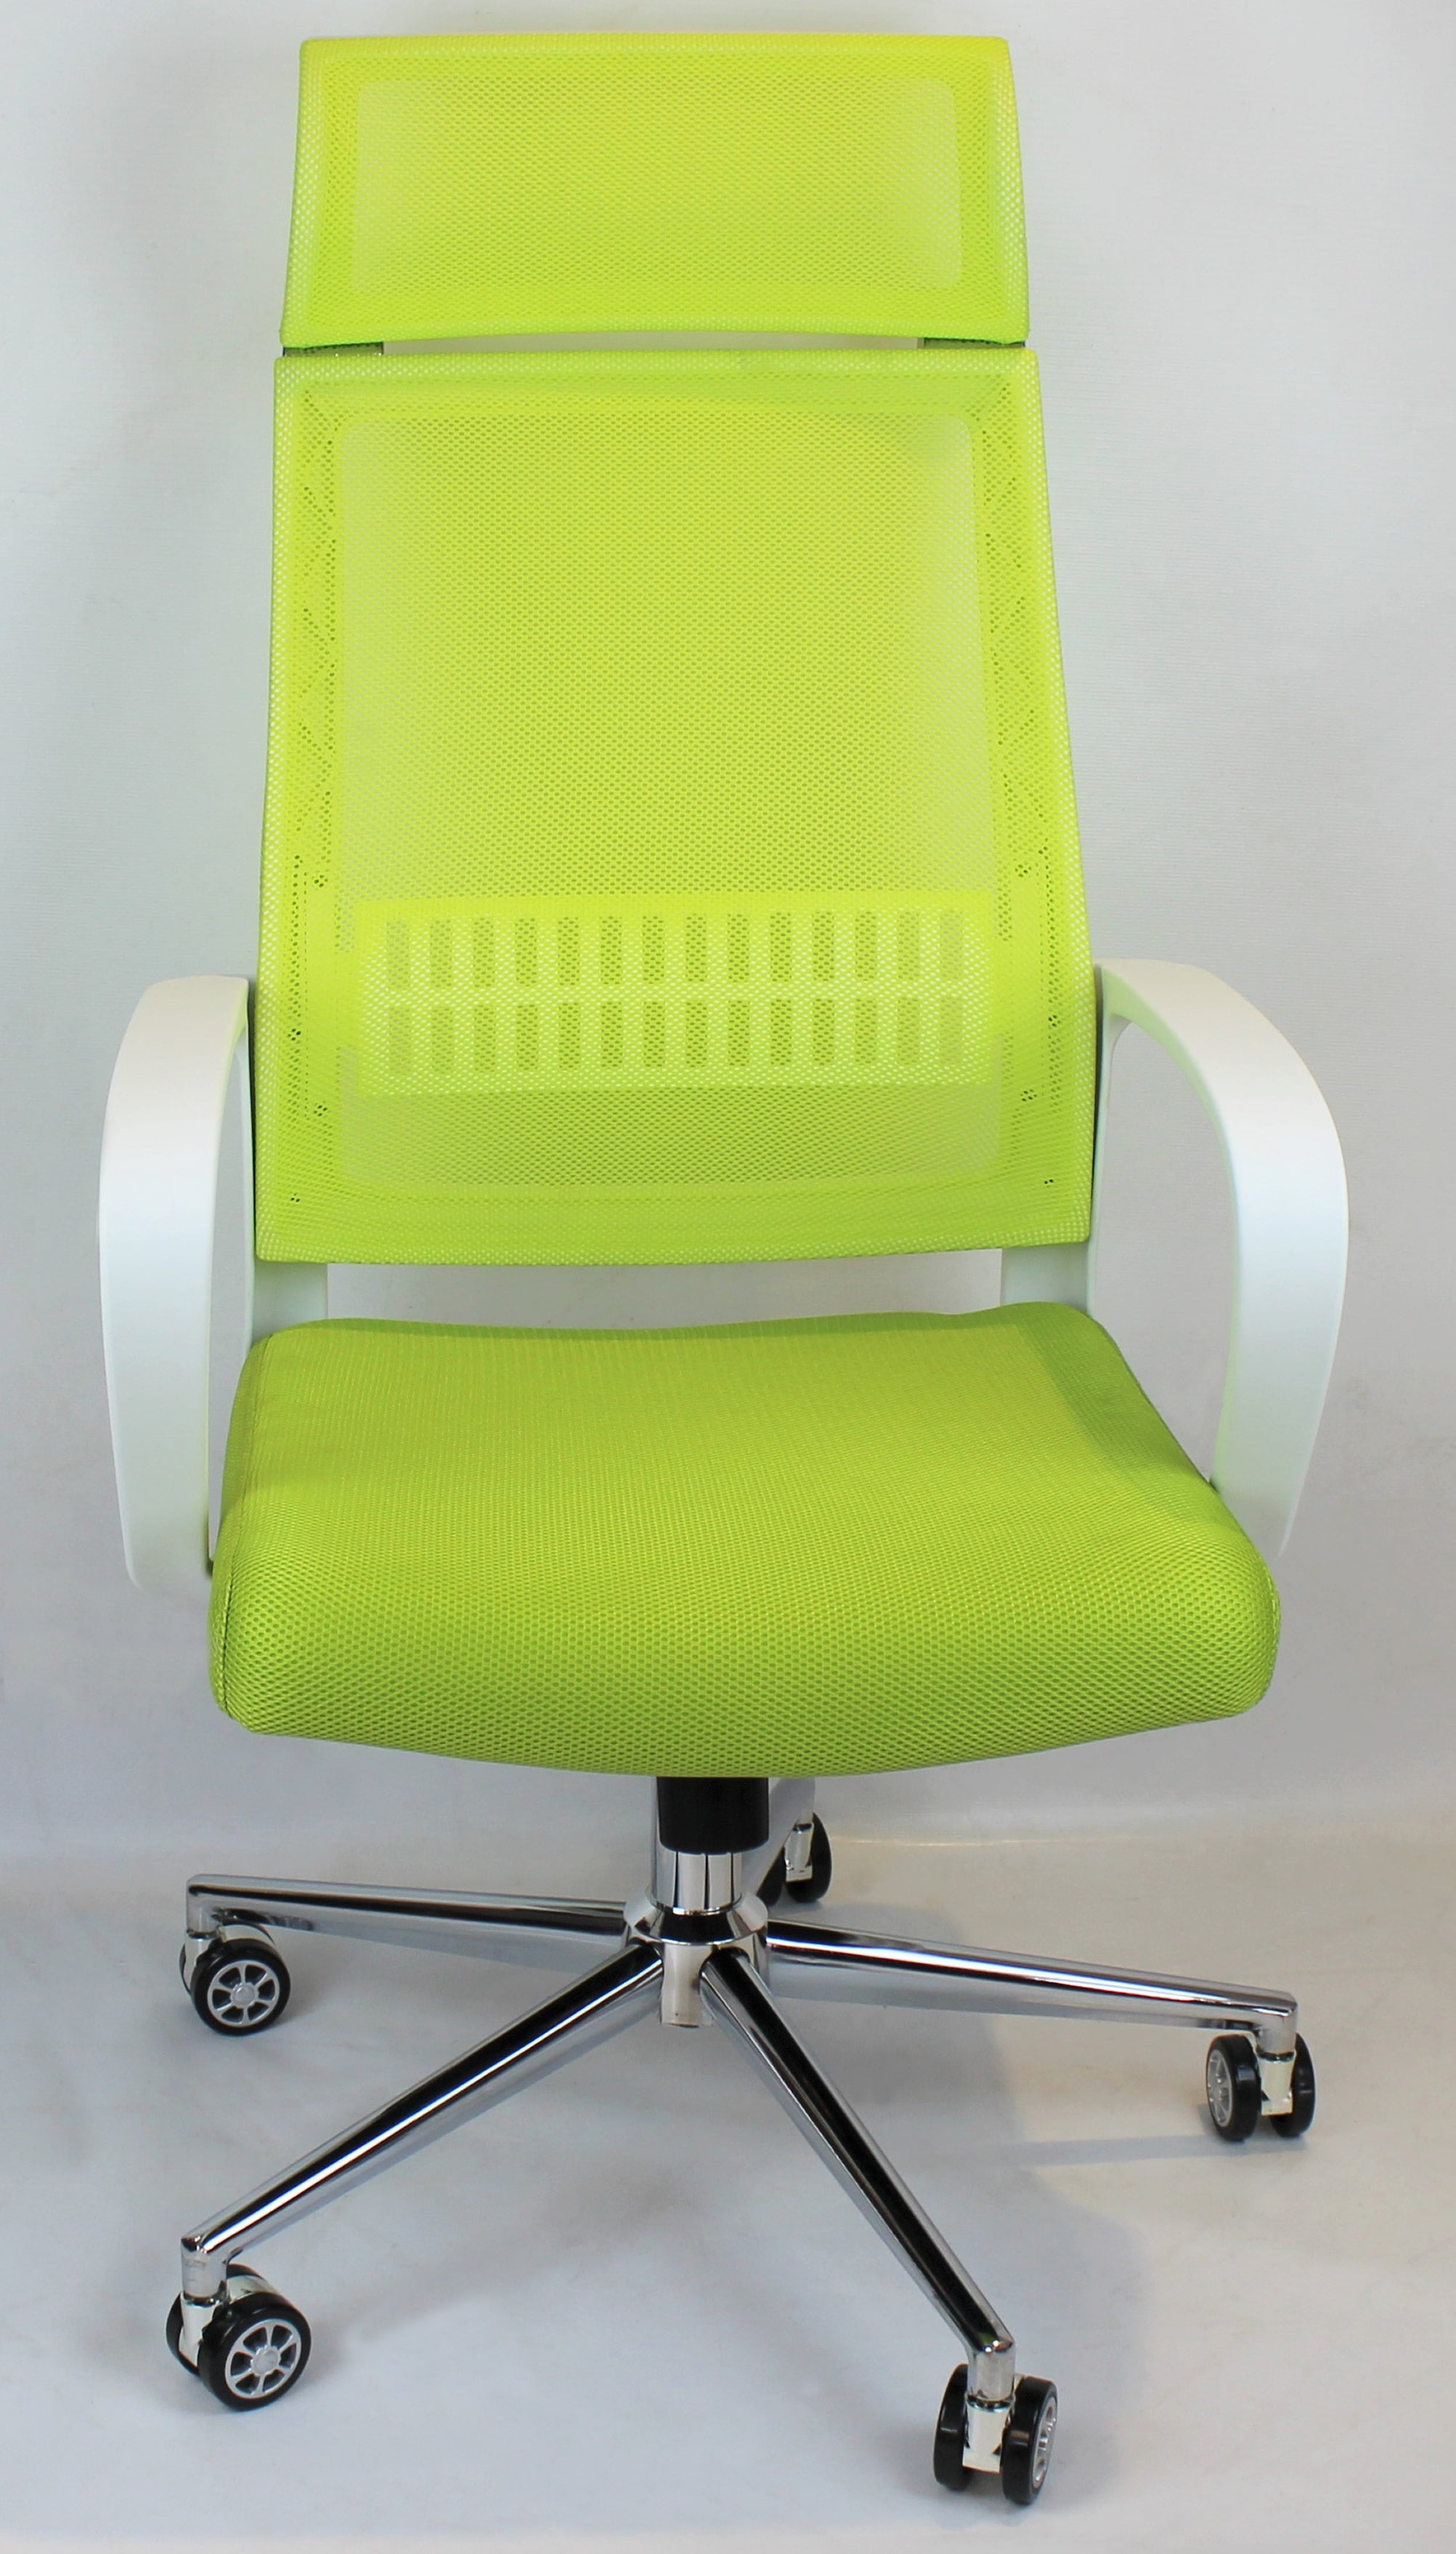 Modern Office Chair with Green Mesh - DH-086